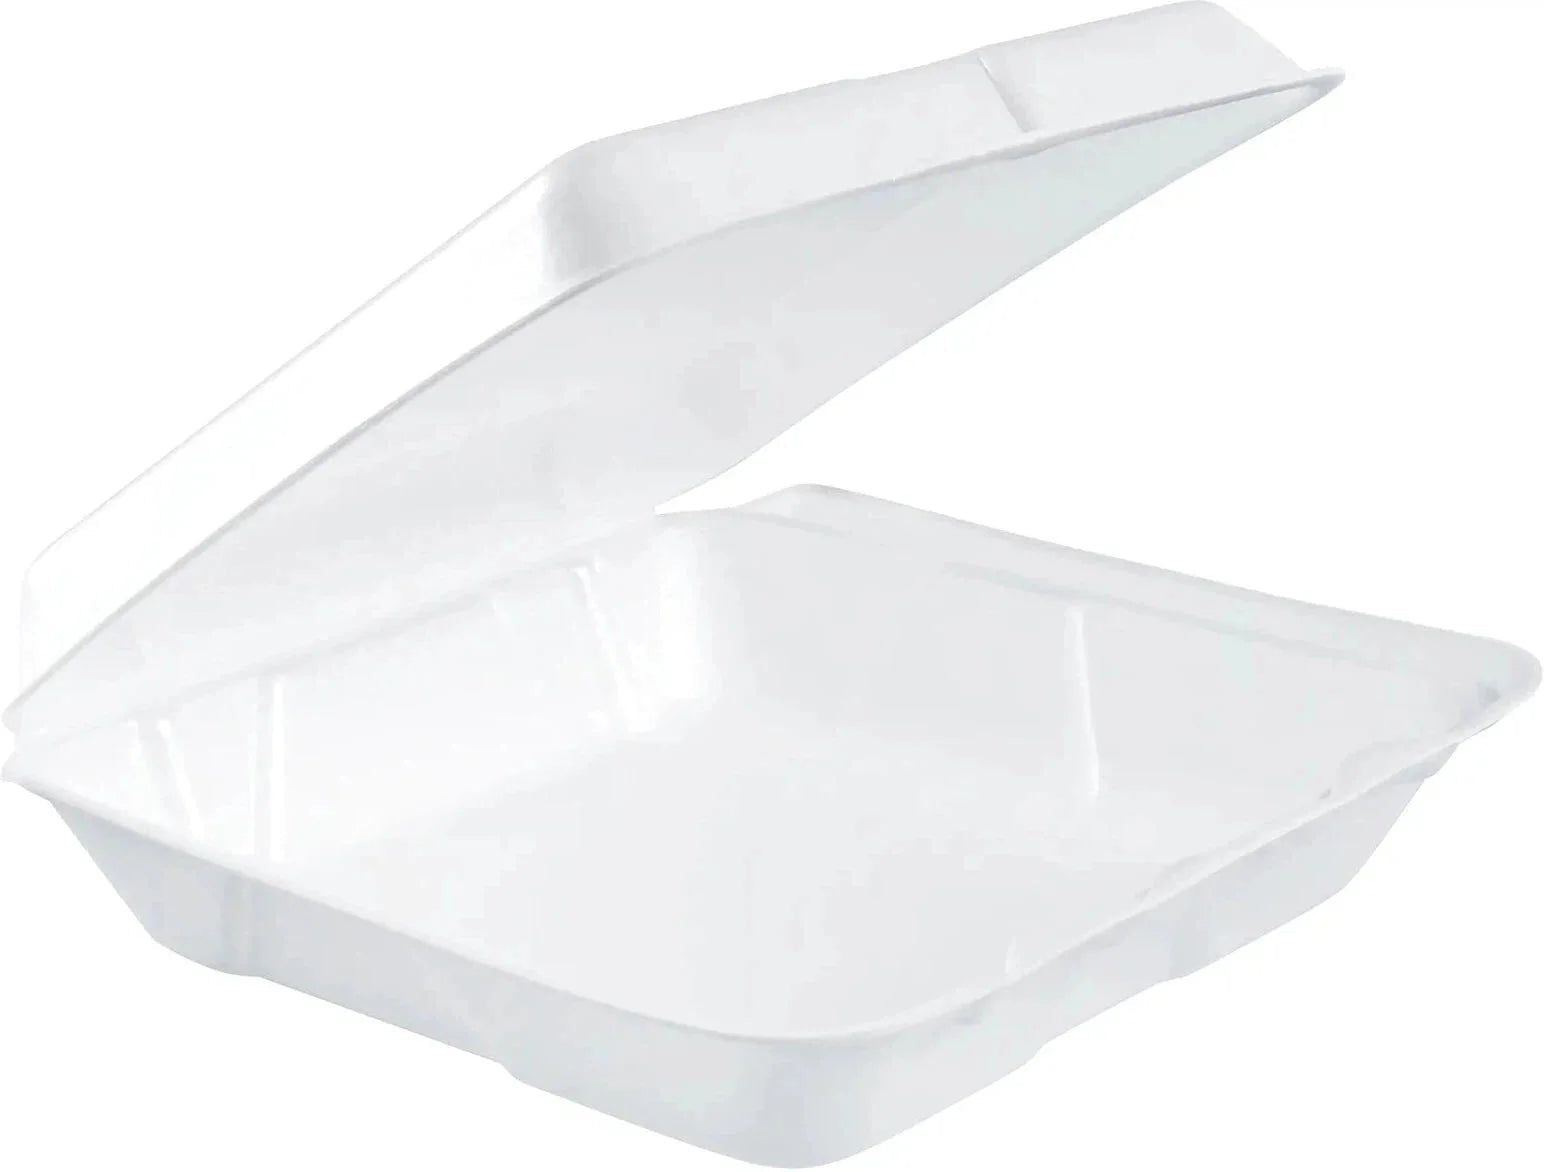 Dart Container - 8" x 7.5" x 2.18" White Insulated Foam Hinged Container, 200/Cs - 80HT1R